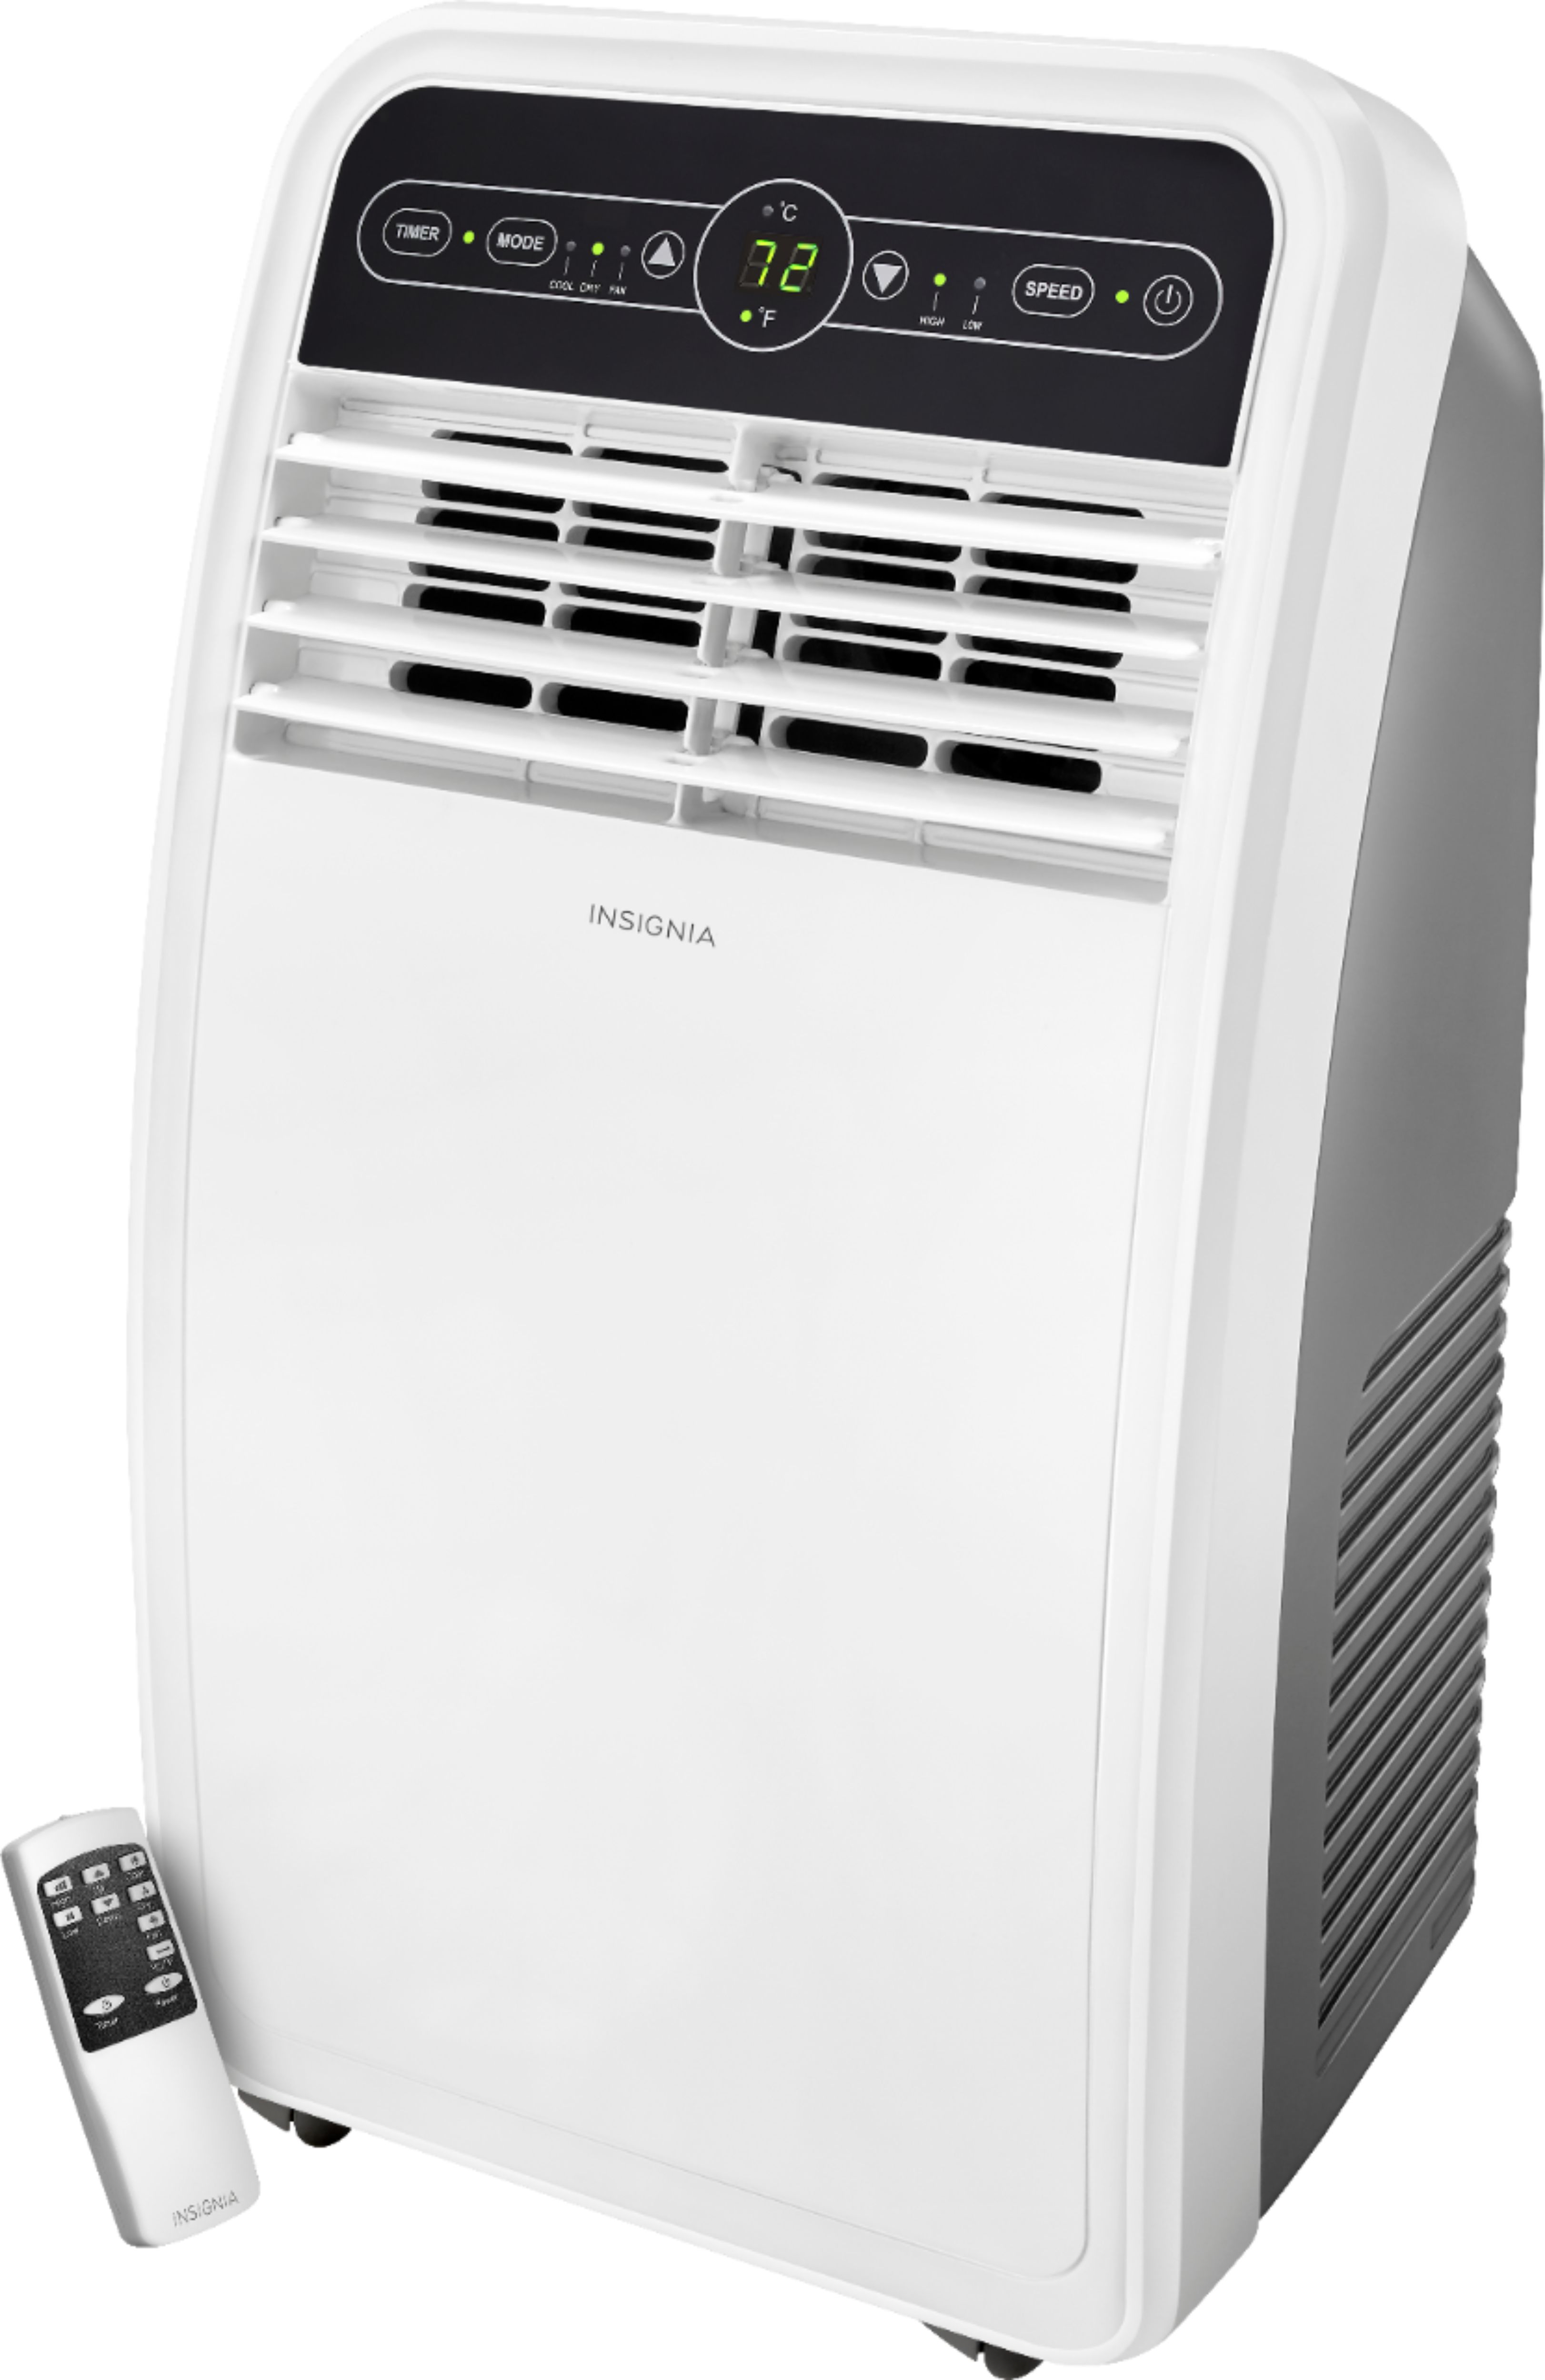 Find Out About A Conveyable Air Purifier